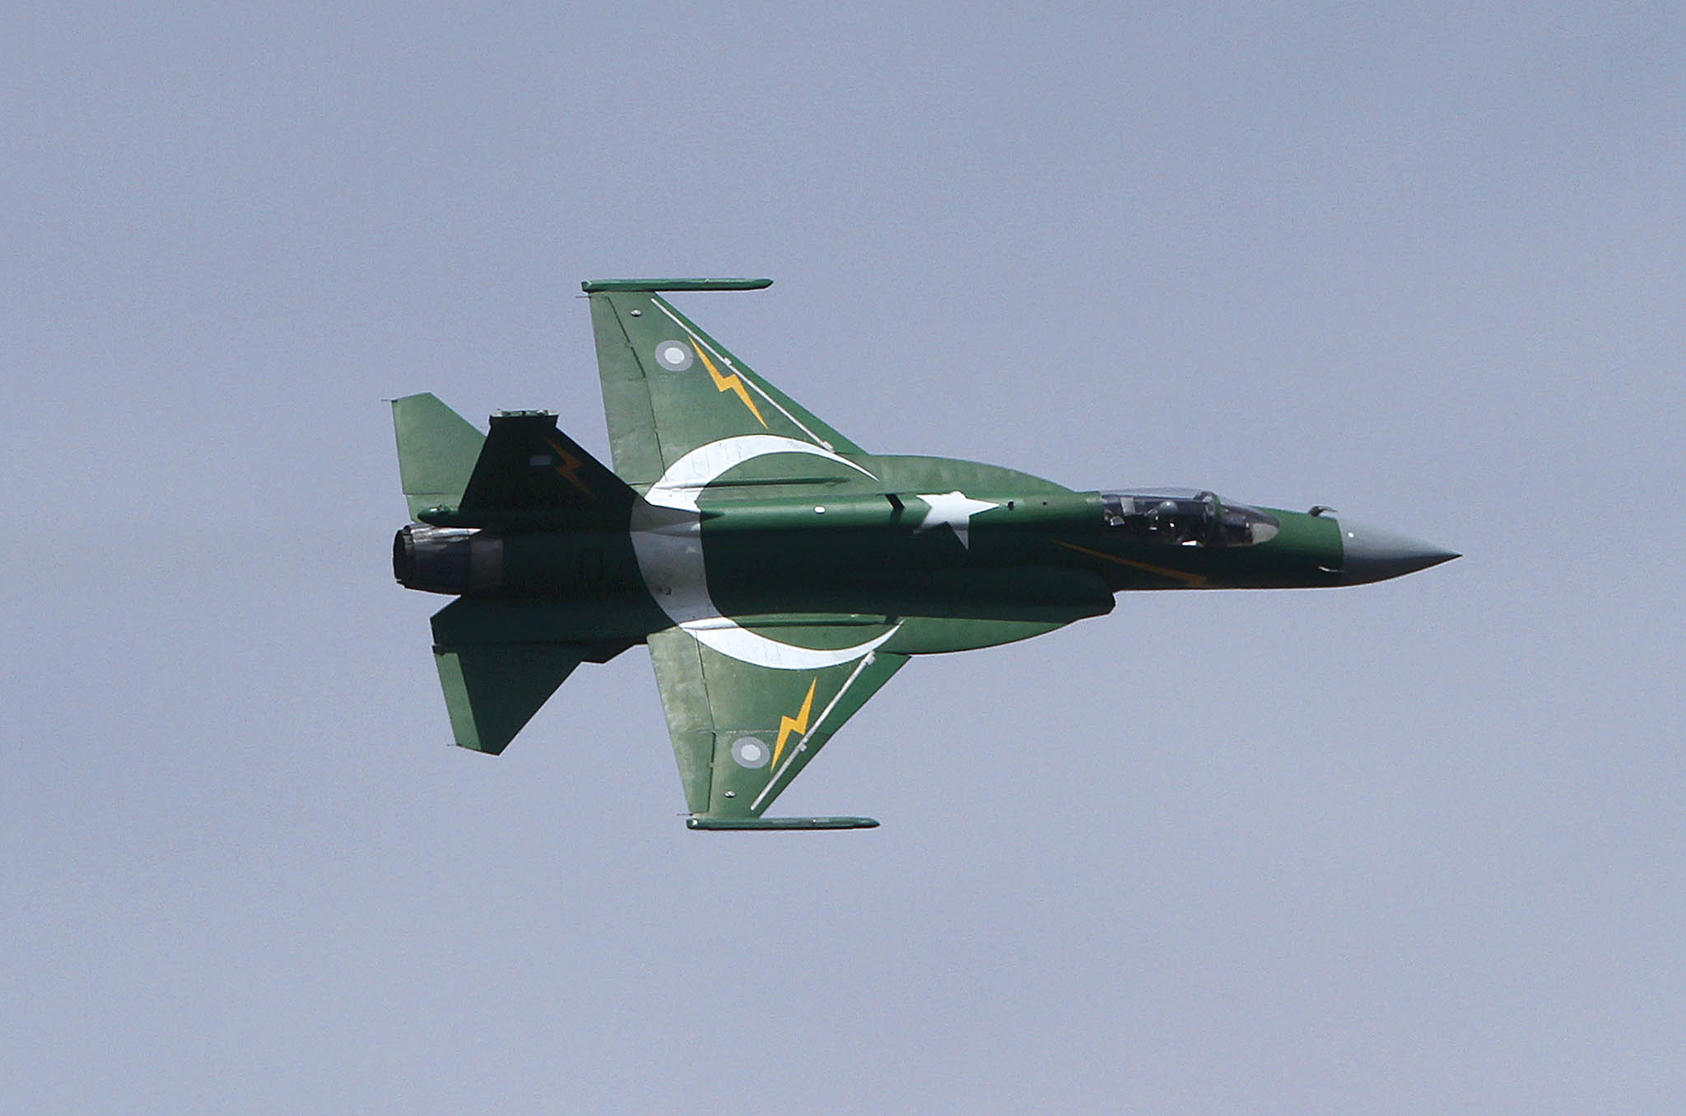 A JF-17 jet, jointly manufactured by China and Pakistan, flies over Islamabad, Pakistan, during a Defense Day celebration on September 6, 2015. (Photo by Anjum Naveed/AP)